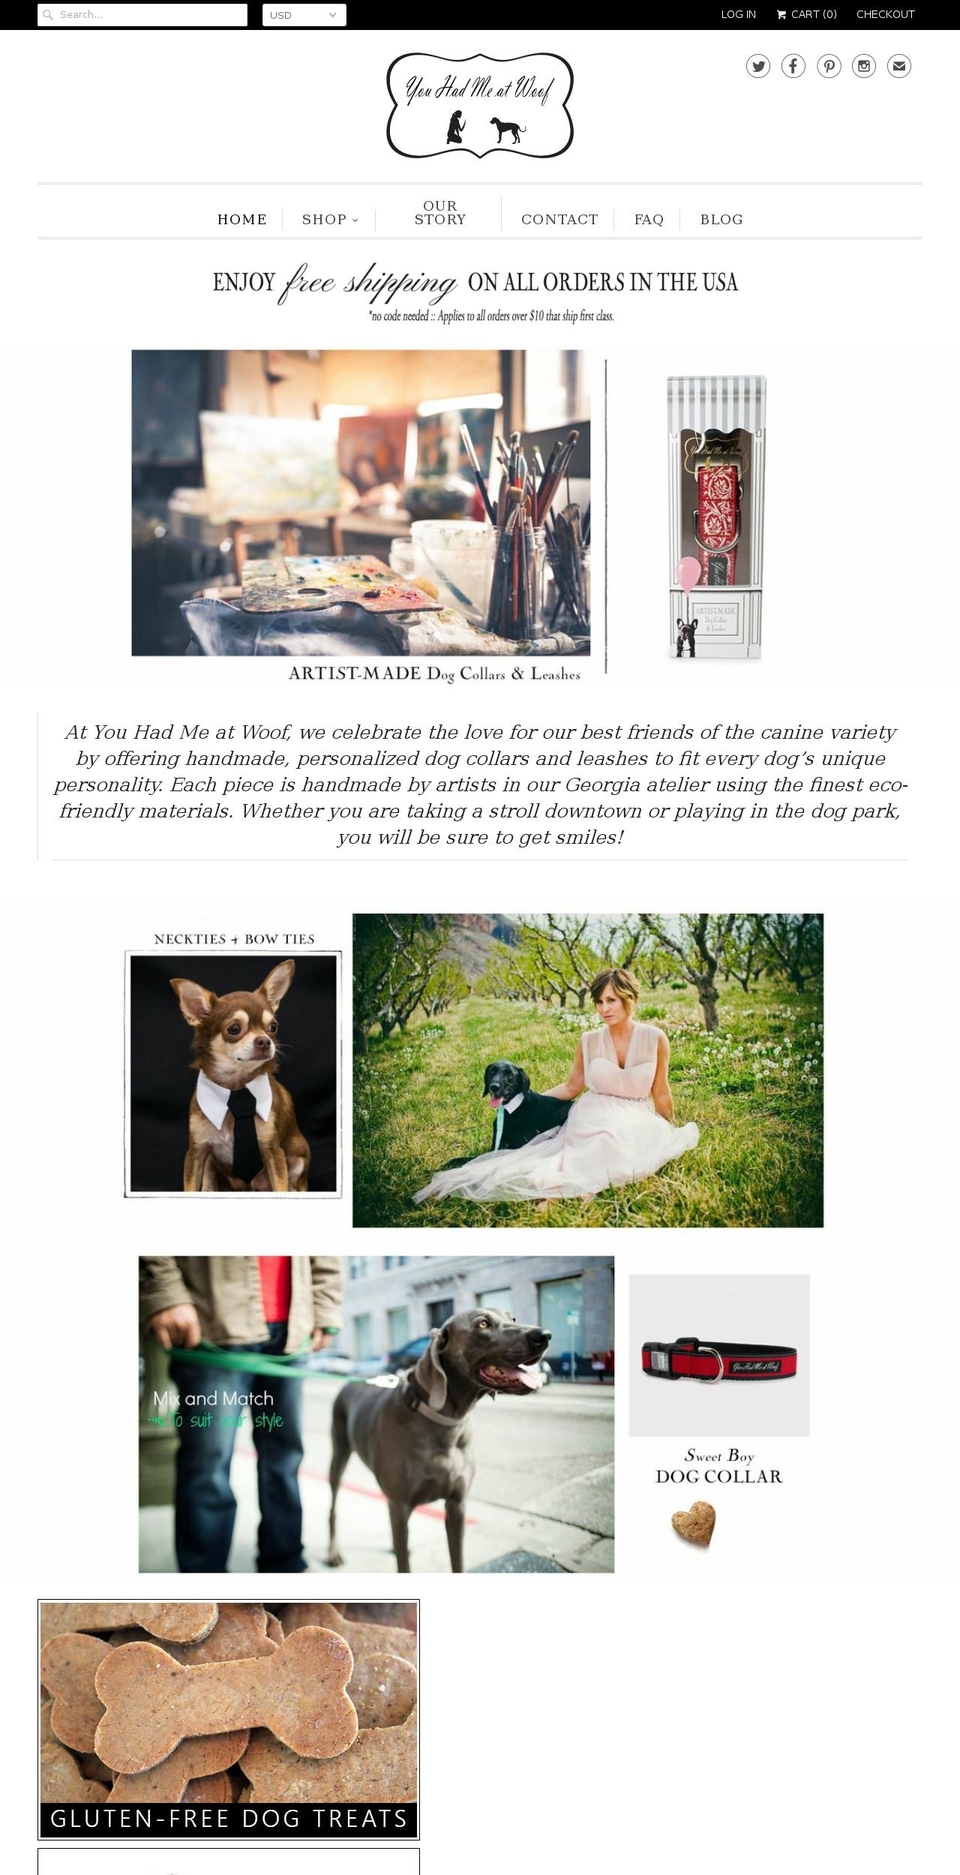 youhadmeatwoof.boutique shopify website screenshot